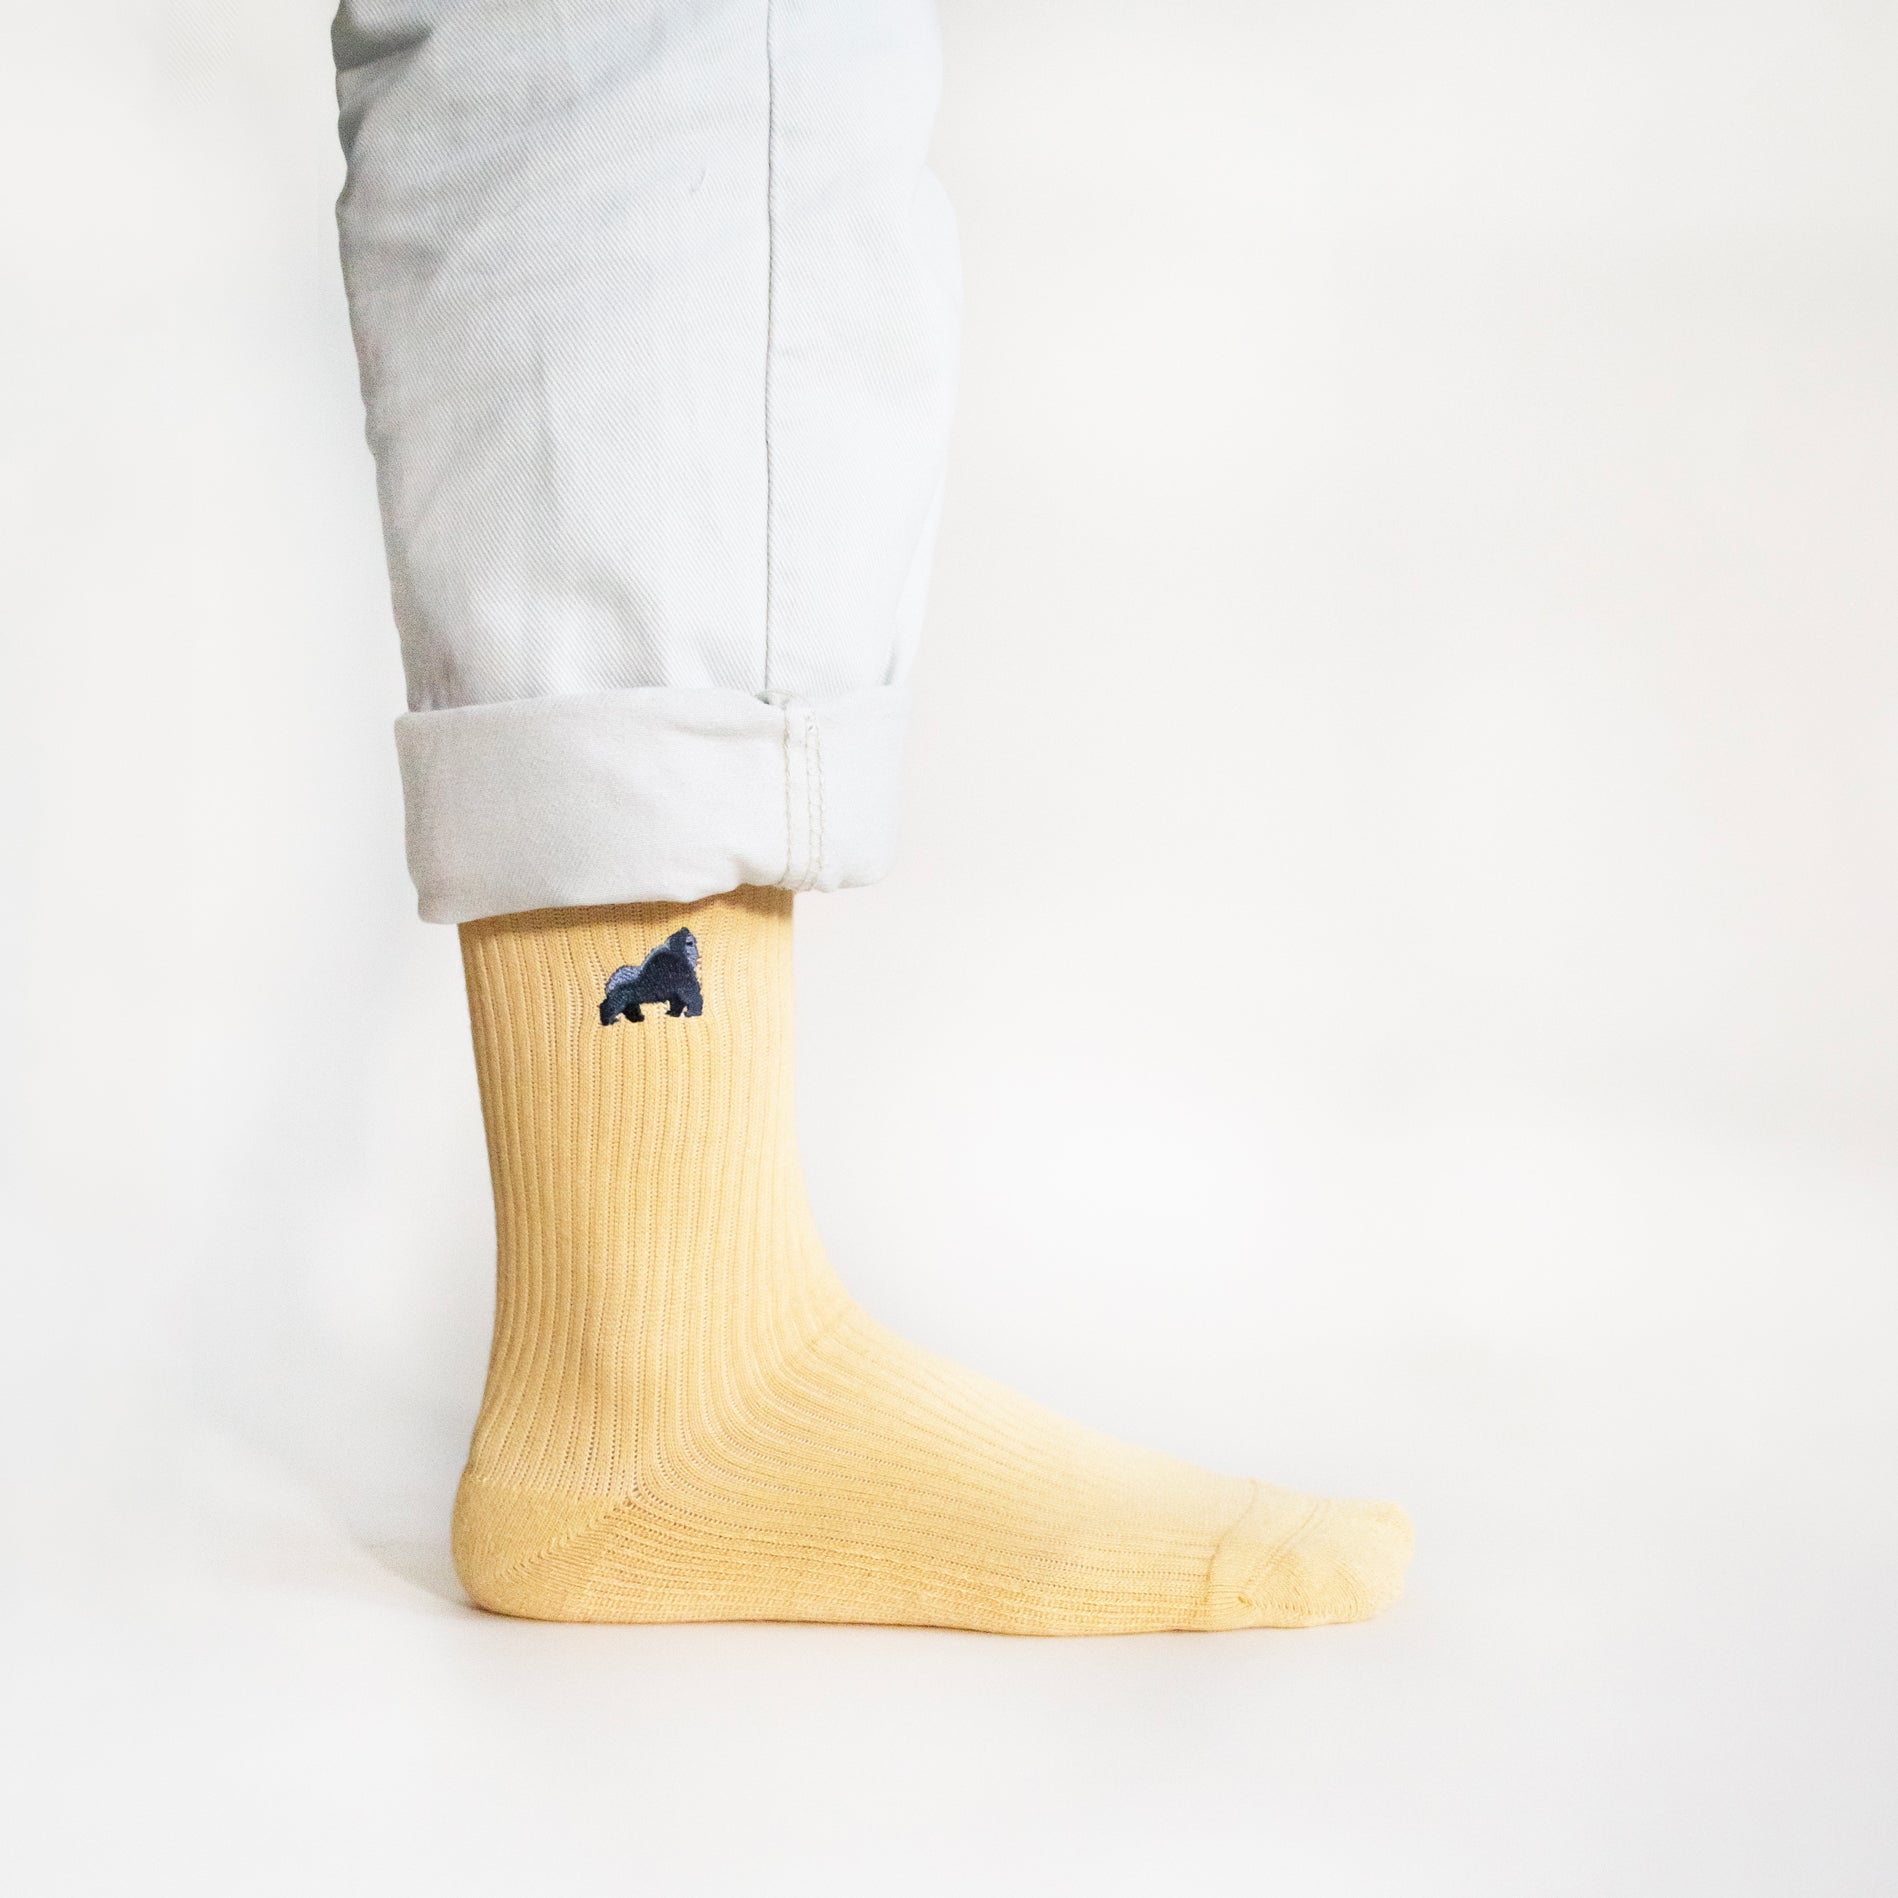 minimalist picture of model standing wearing pastel yellow ribbed bamboo socks with an embroidered elephant motif, side angle view